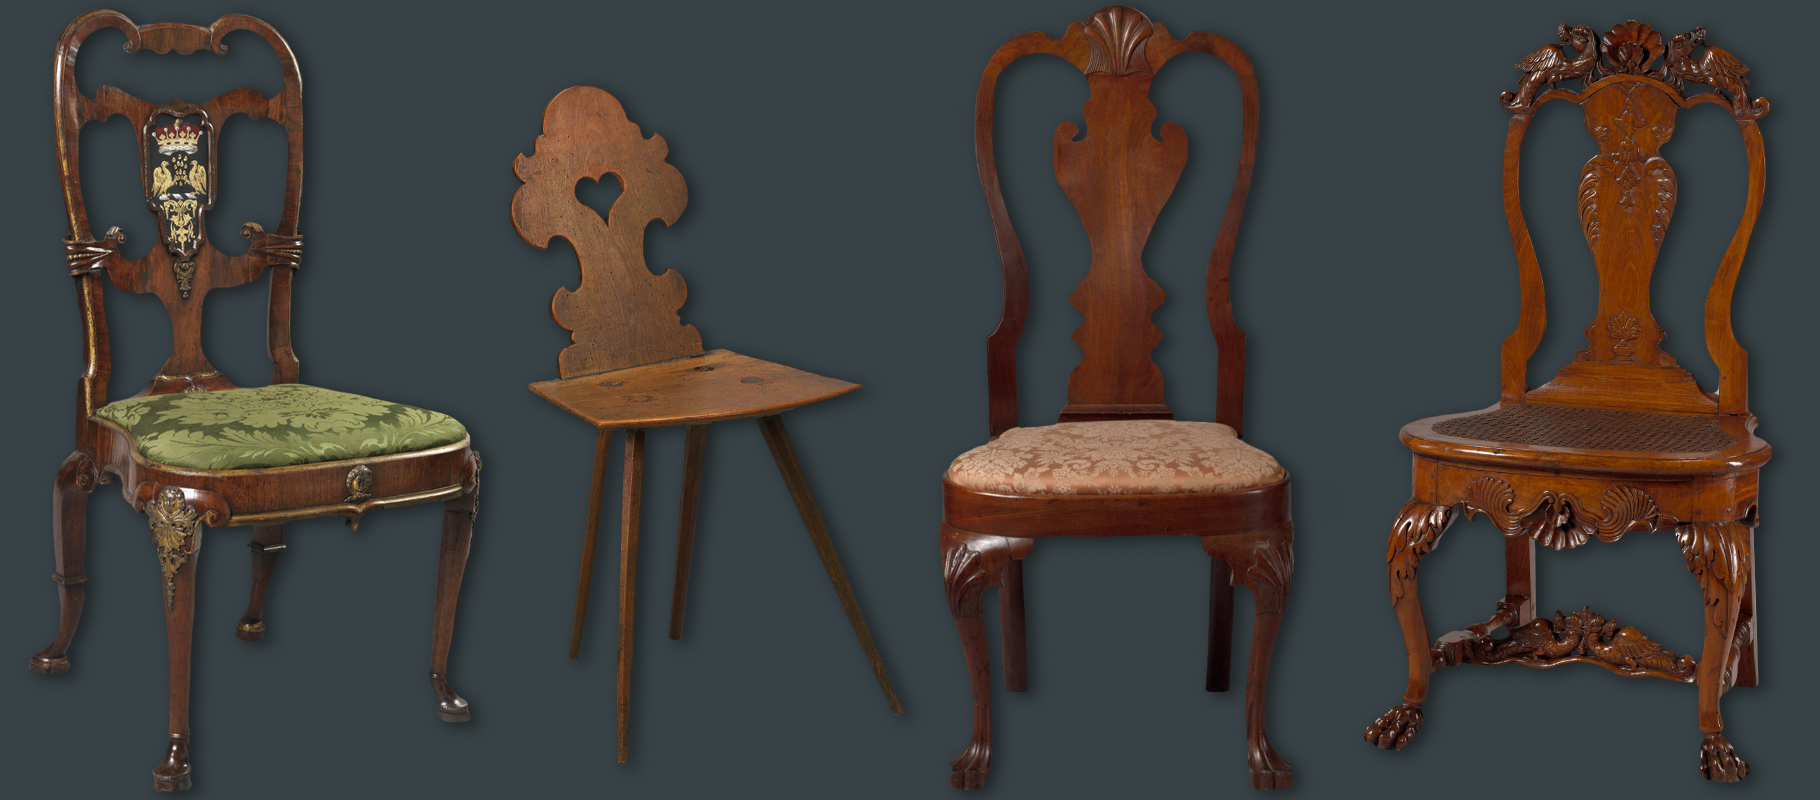 early 18th century chairs